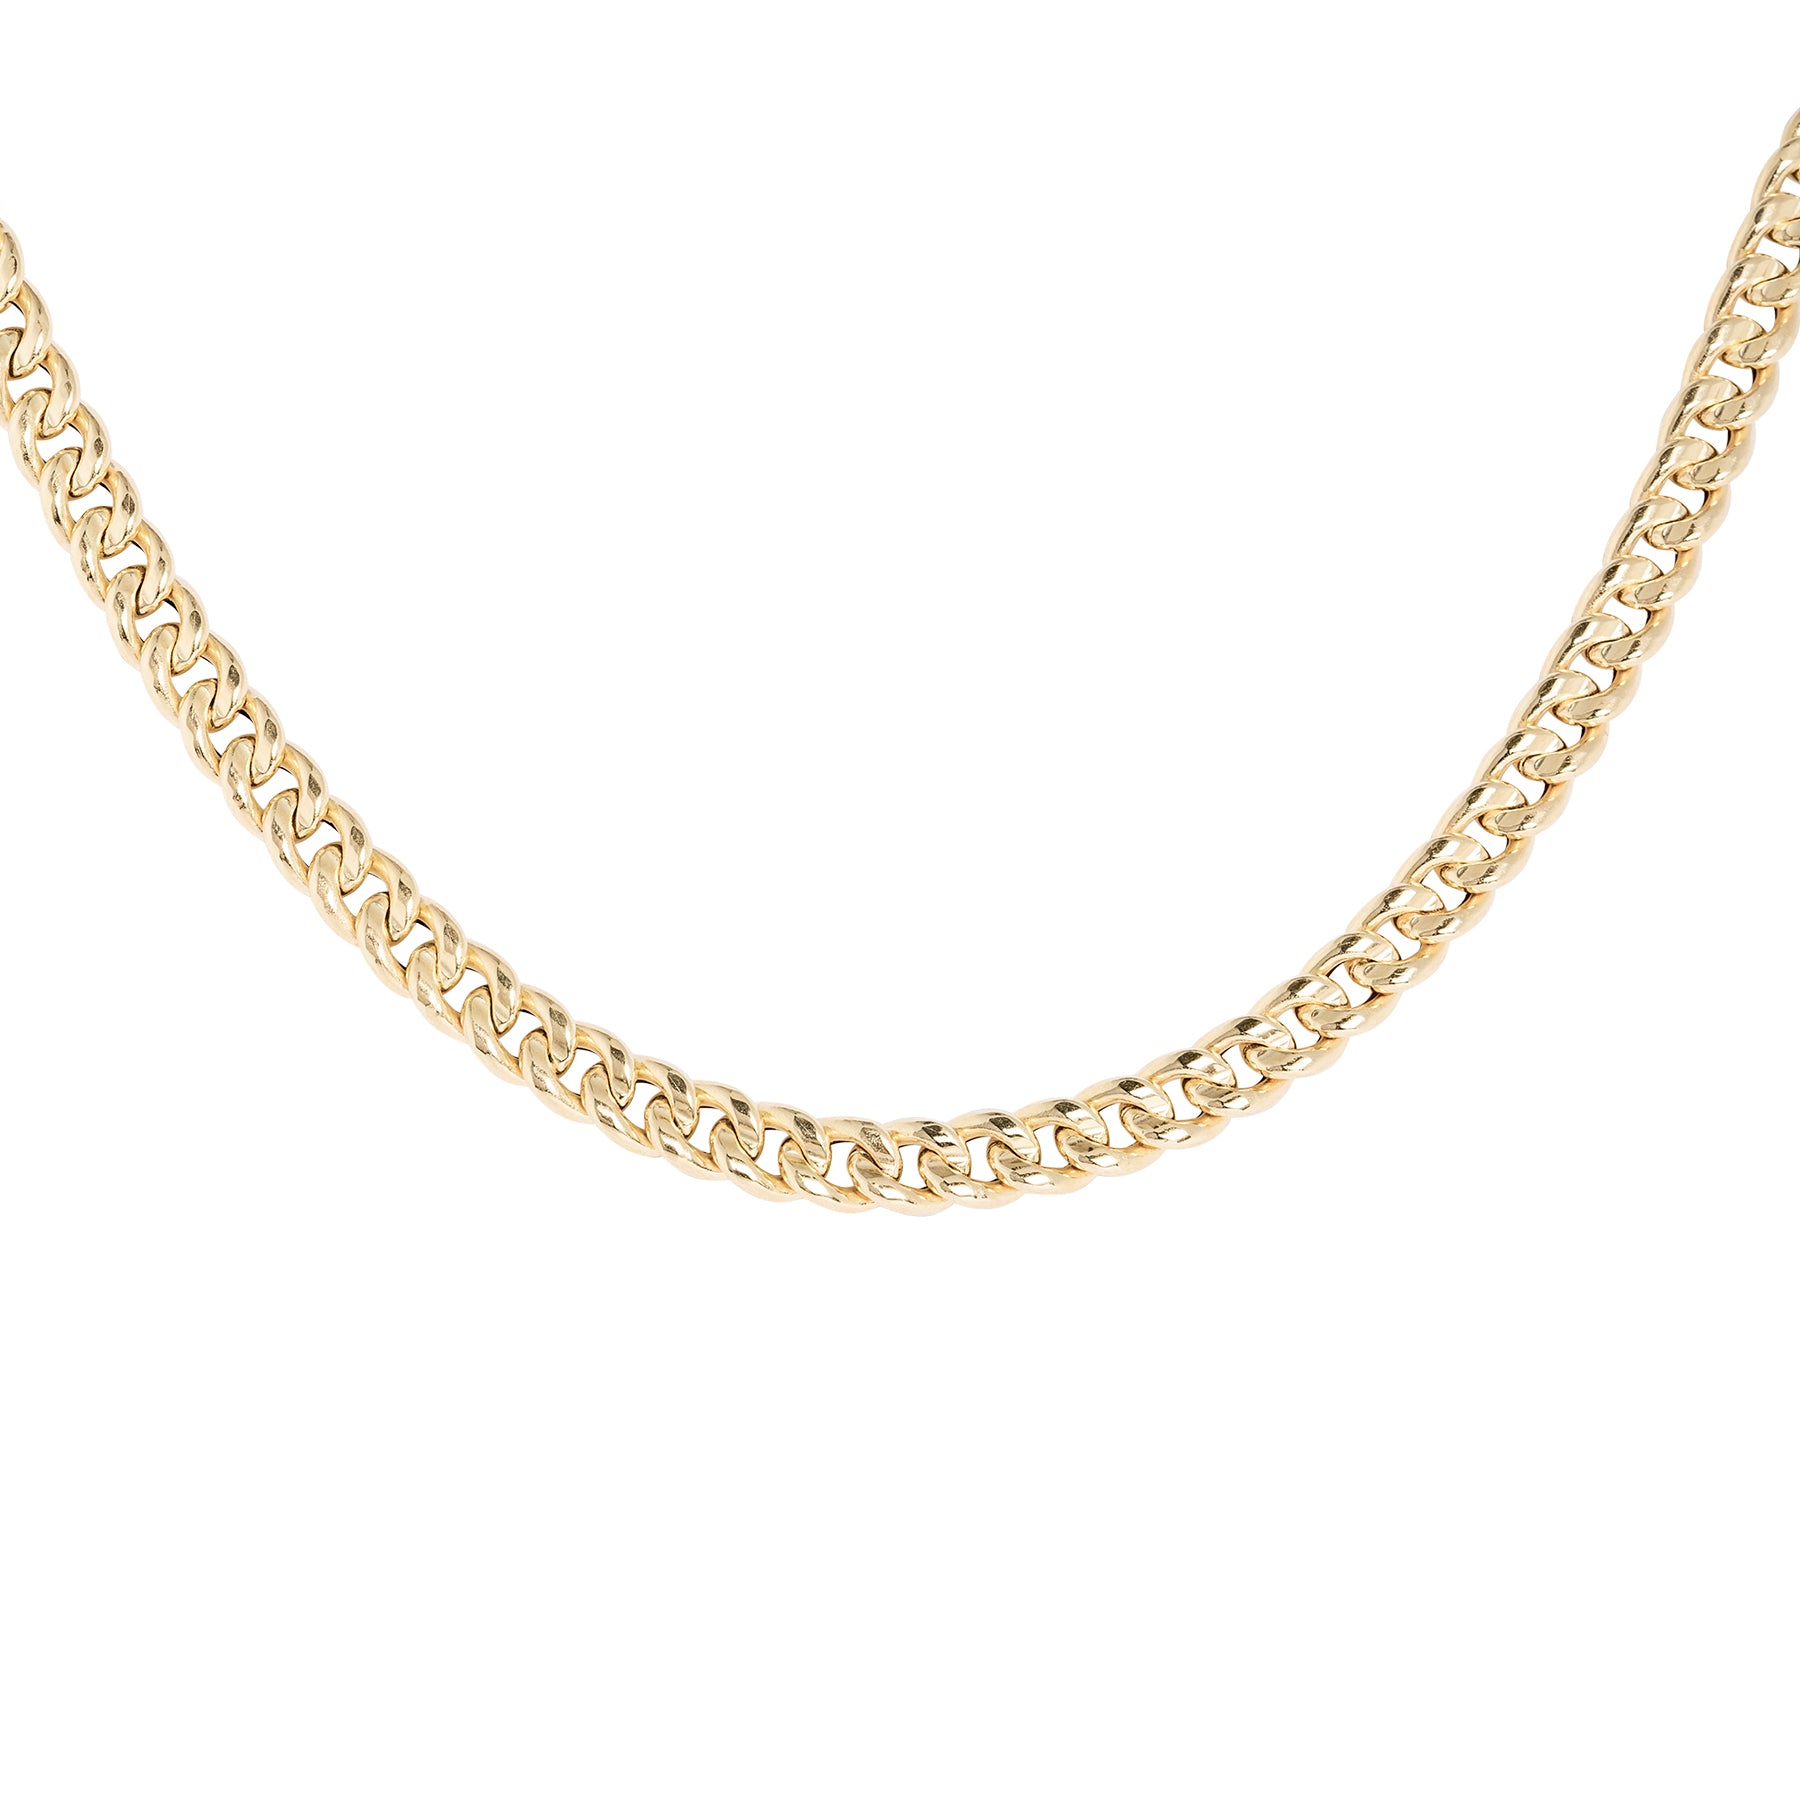 Thick Flat Curb Chain Necklace - Nina Segal Jewelry